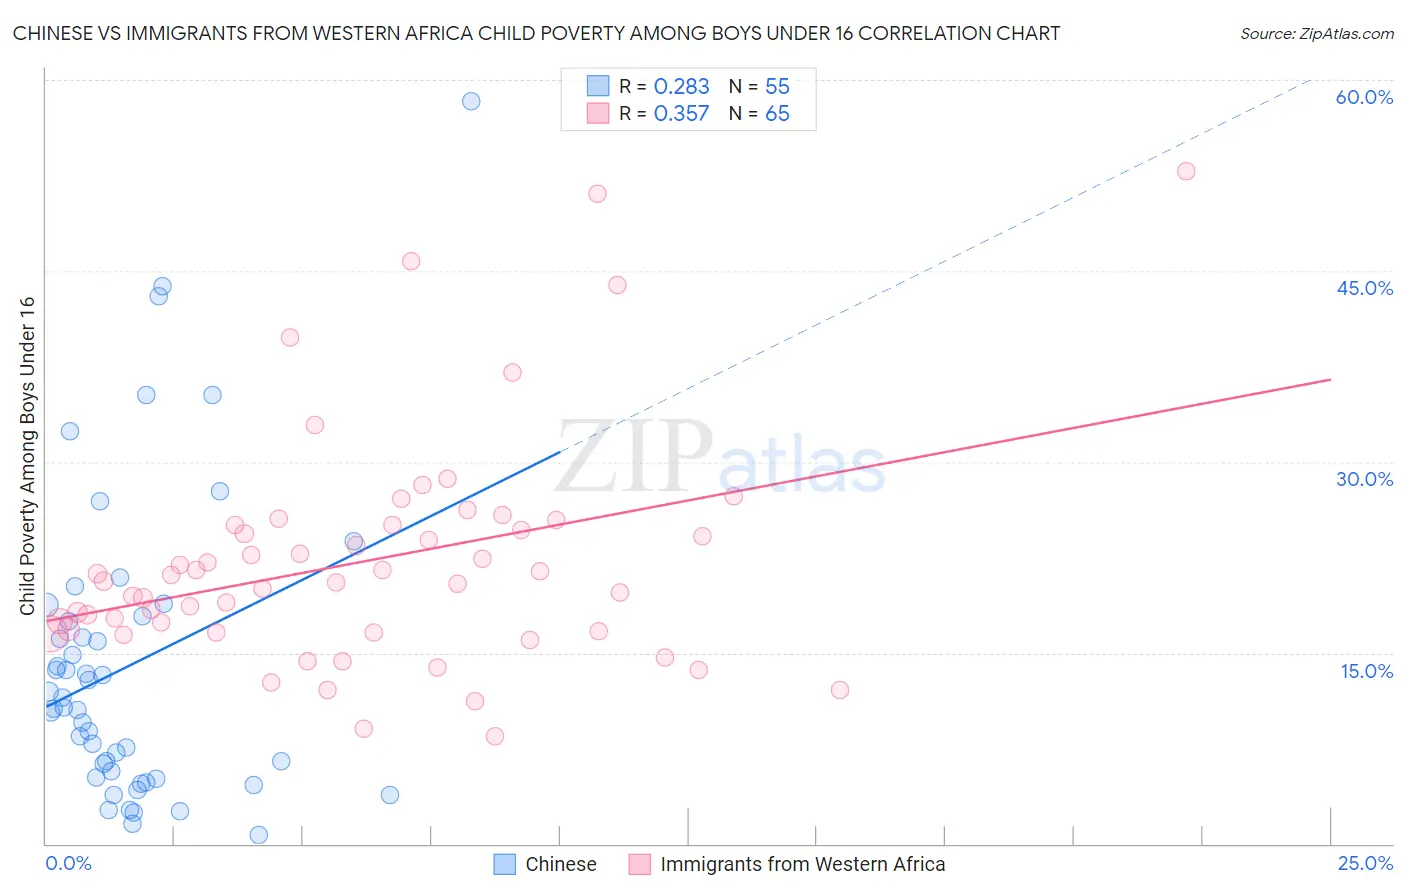 Chinese vs Immigrants from Western Africa Child Poverty Among Boys Under 16